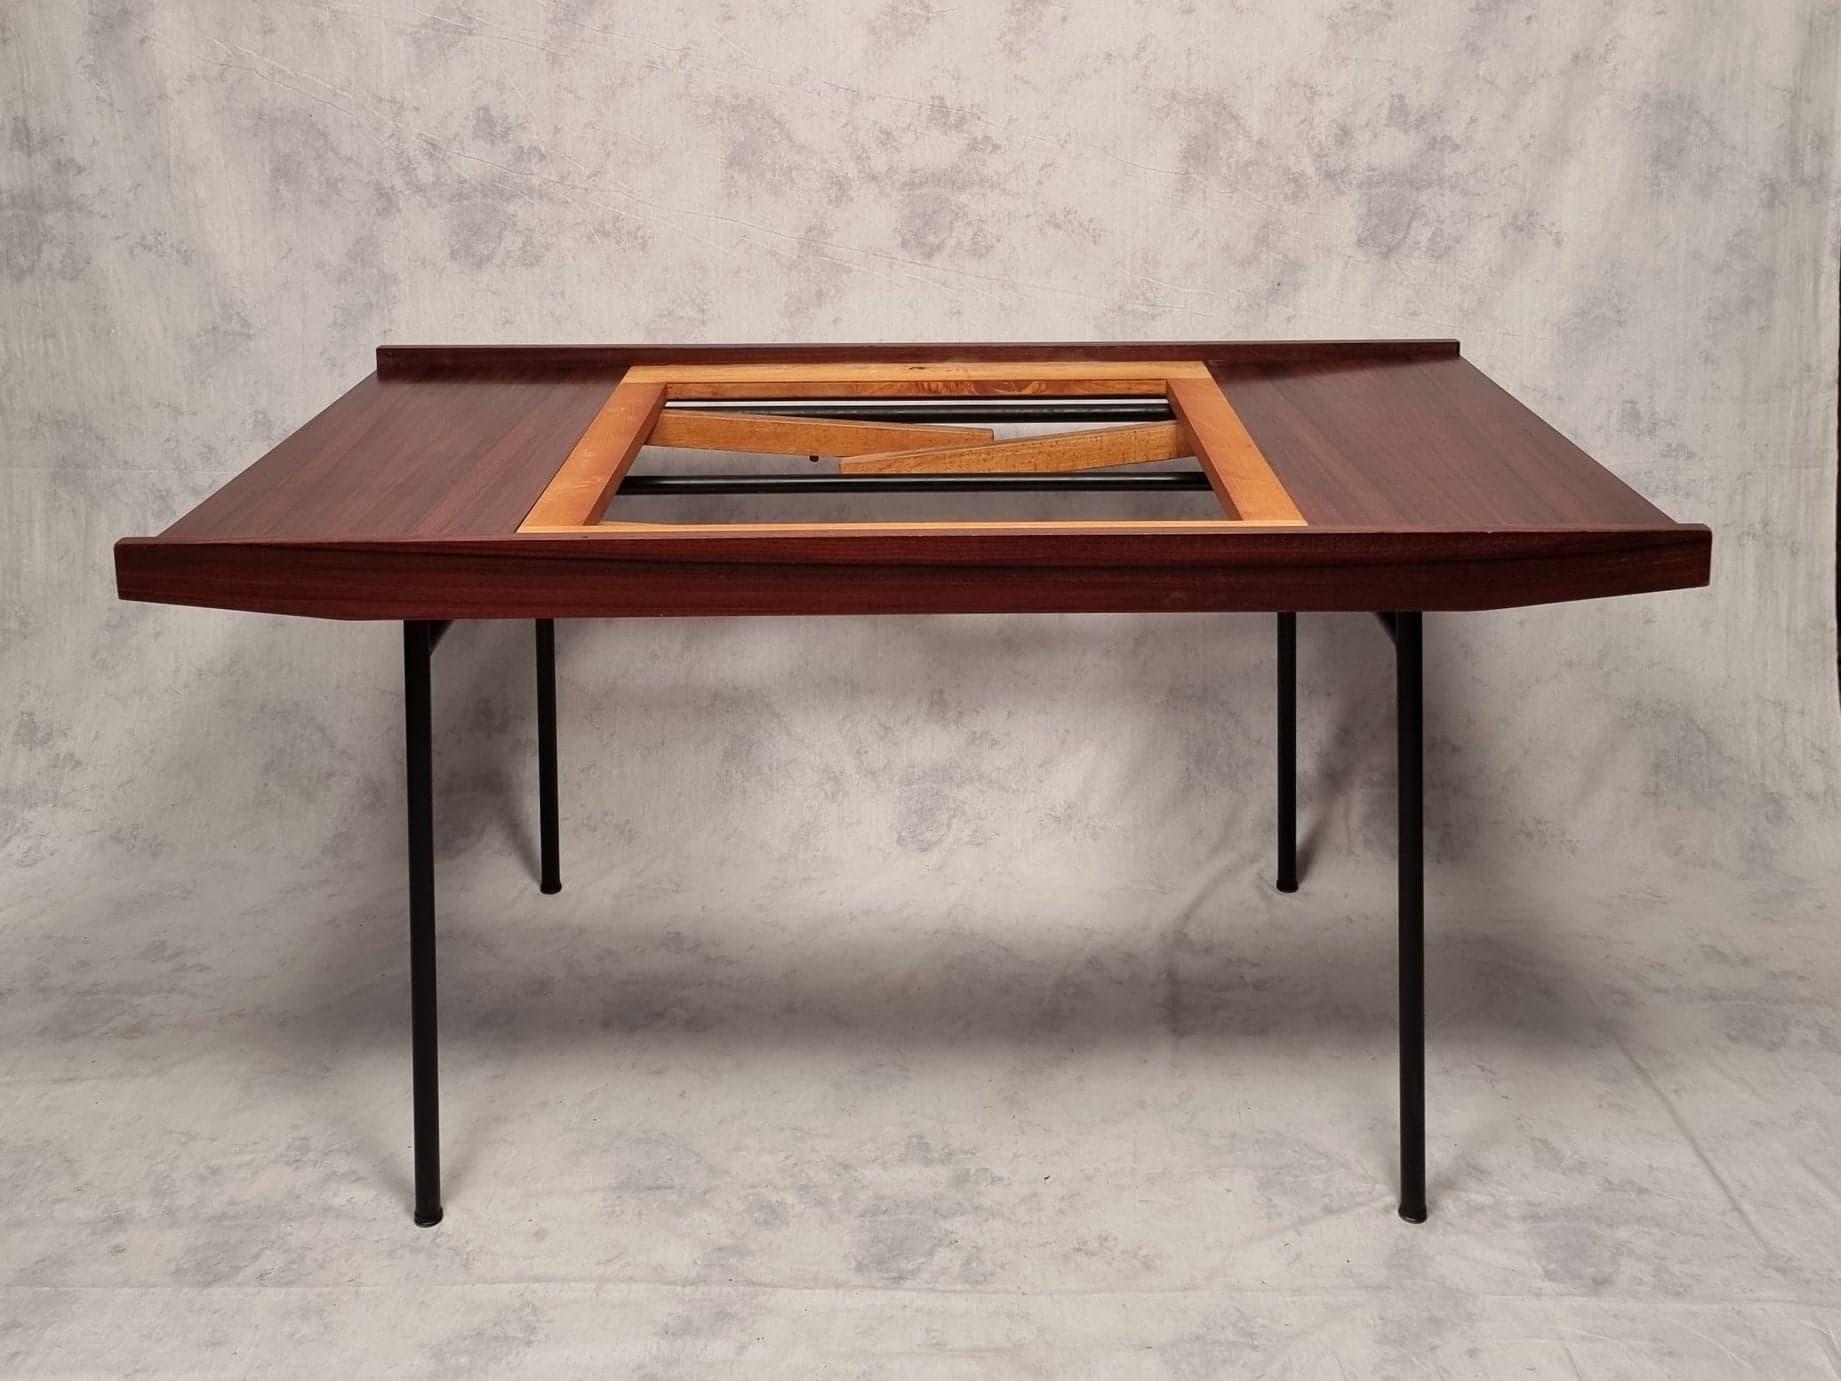 Metal Model 324 Table by Alain Richard, Meubles TV Edition, Rosewood, Ca 1953